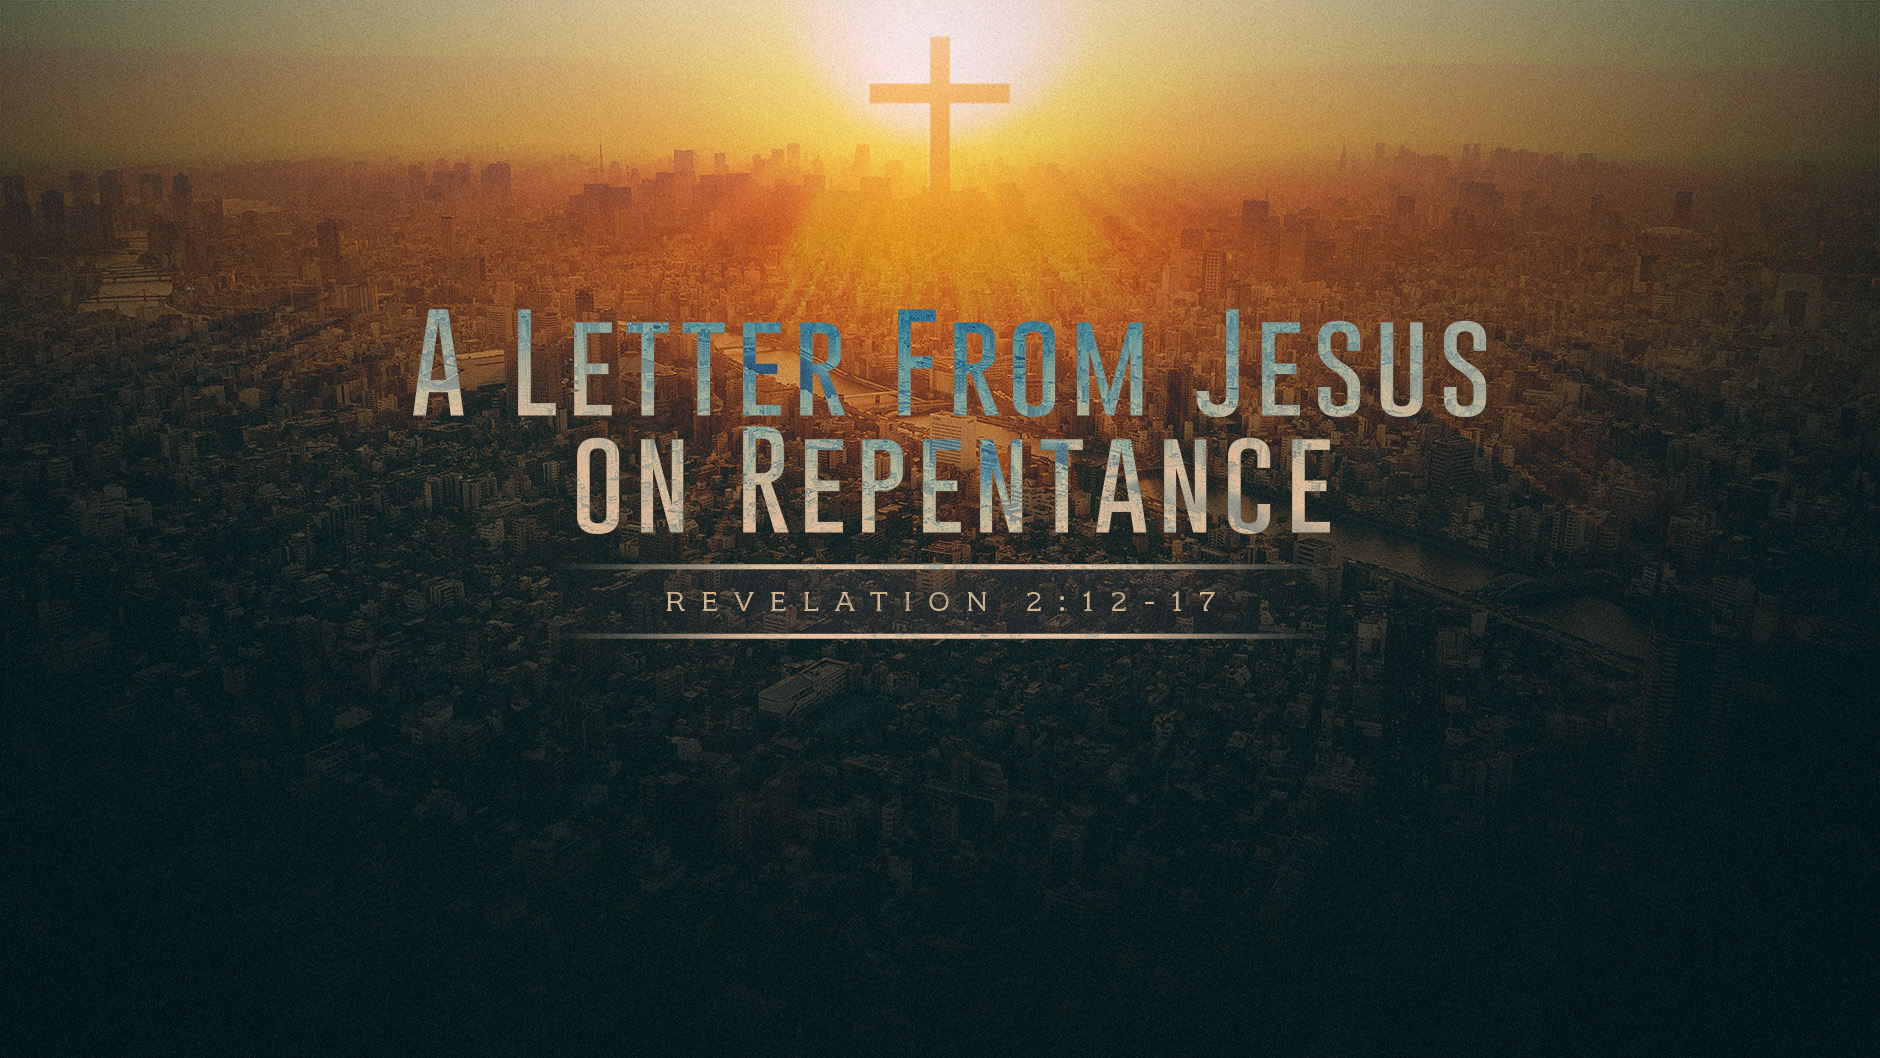 SERMON - A Letter From Jesus on Repentance